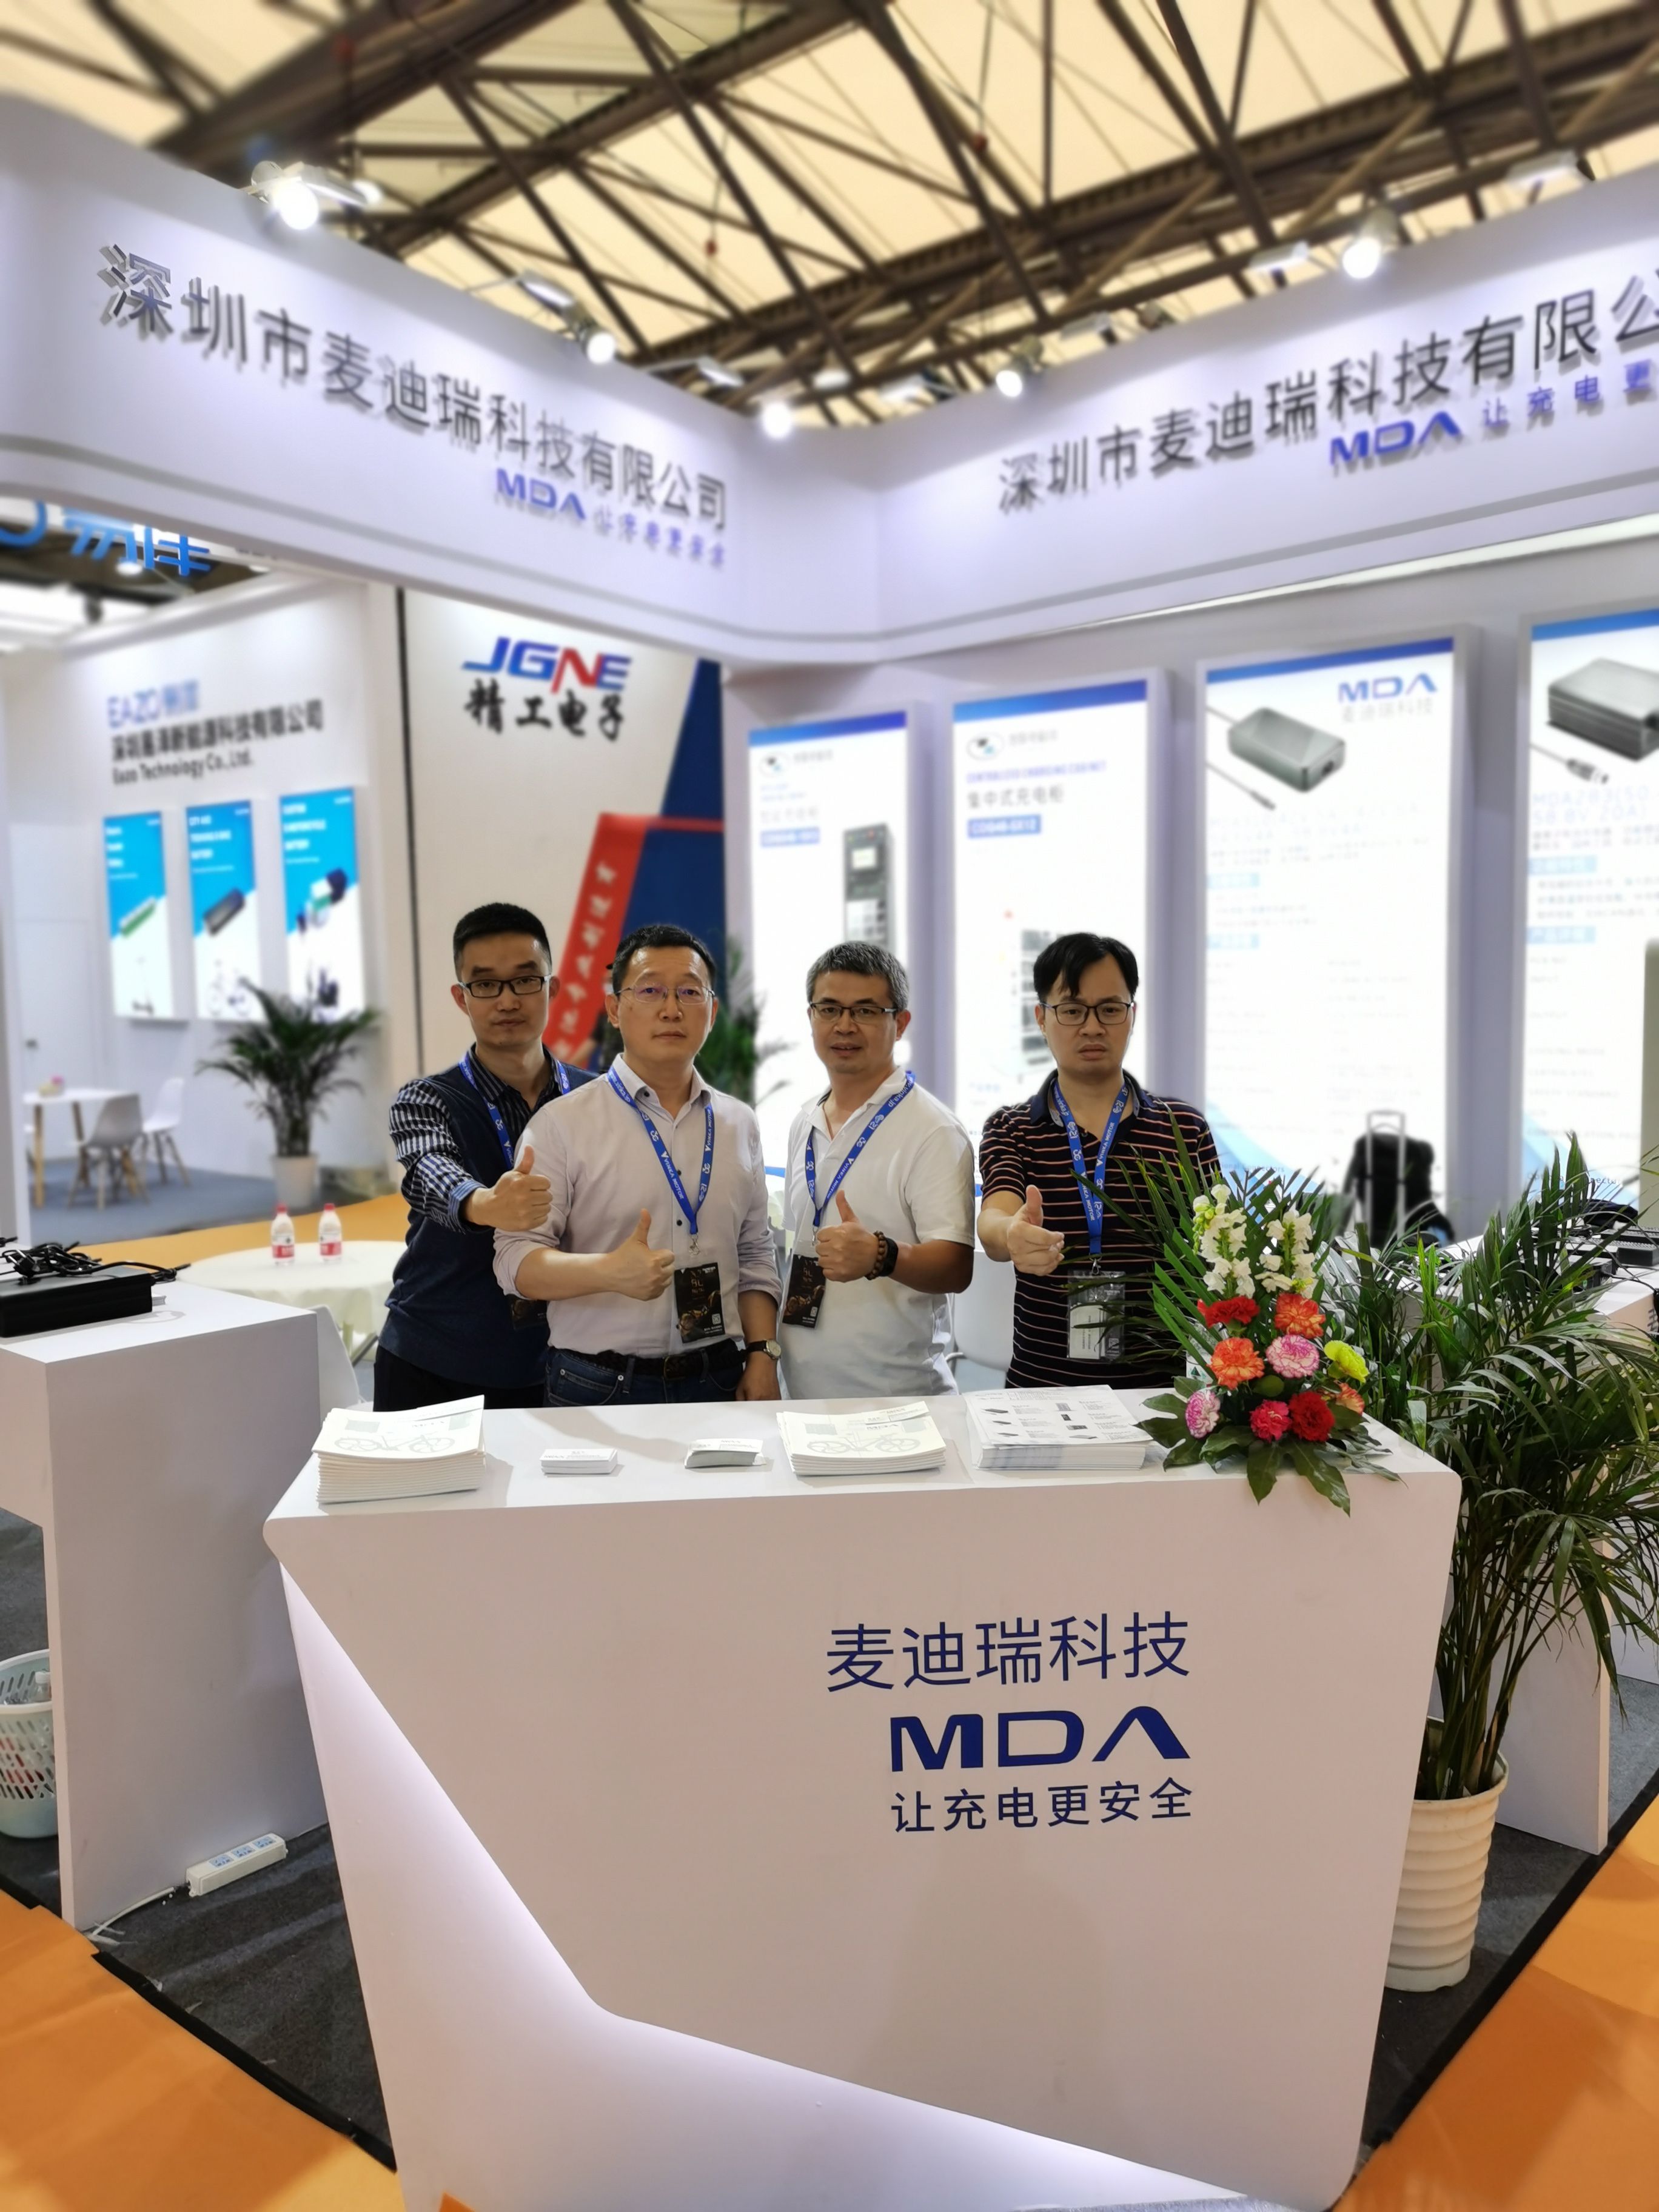 Our company was invited to attend the 30th China International Bicycle Exhibition